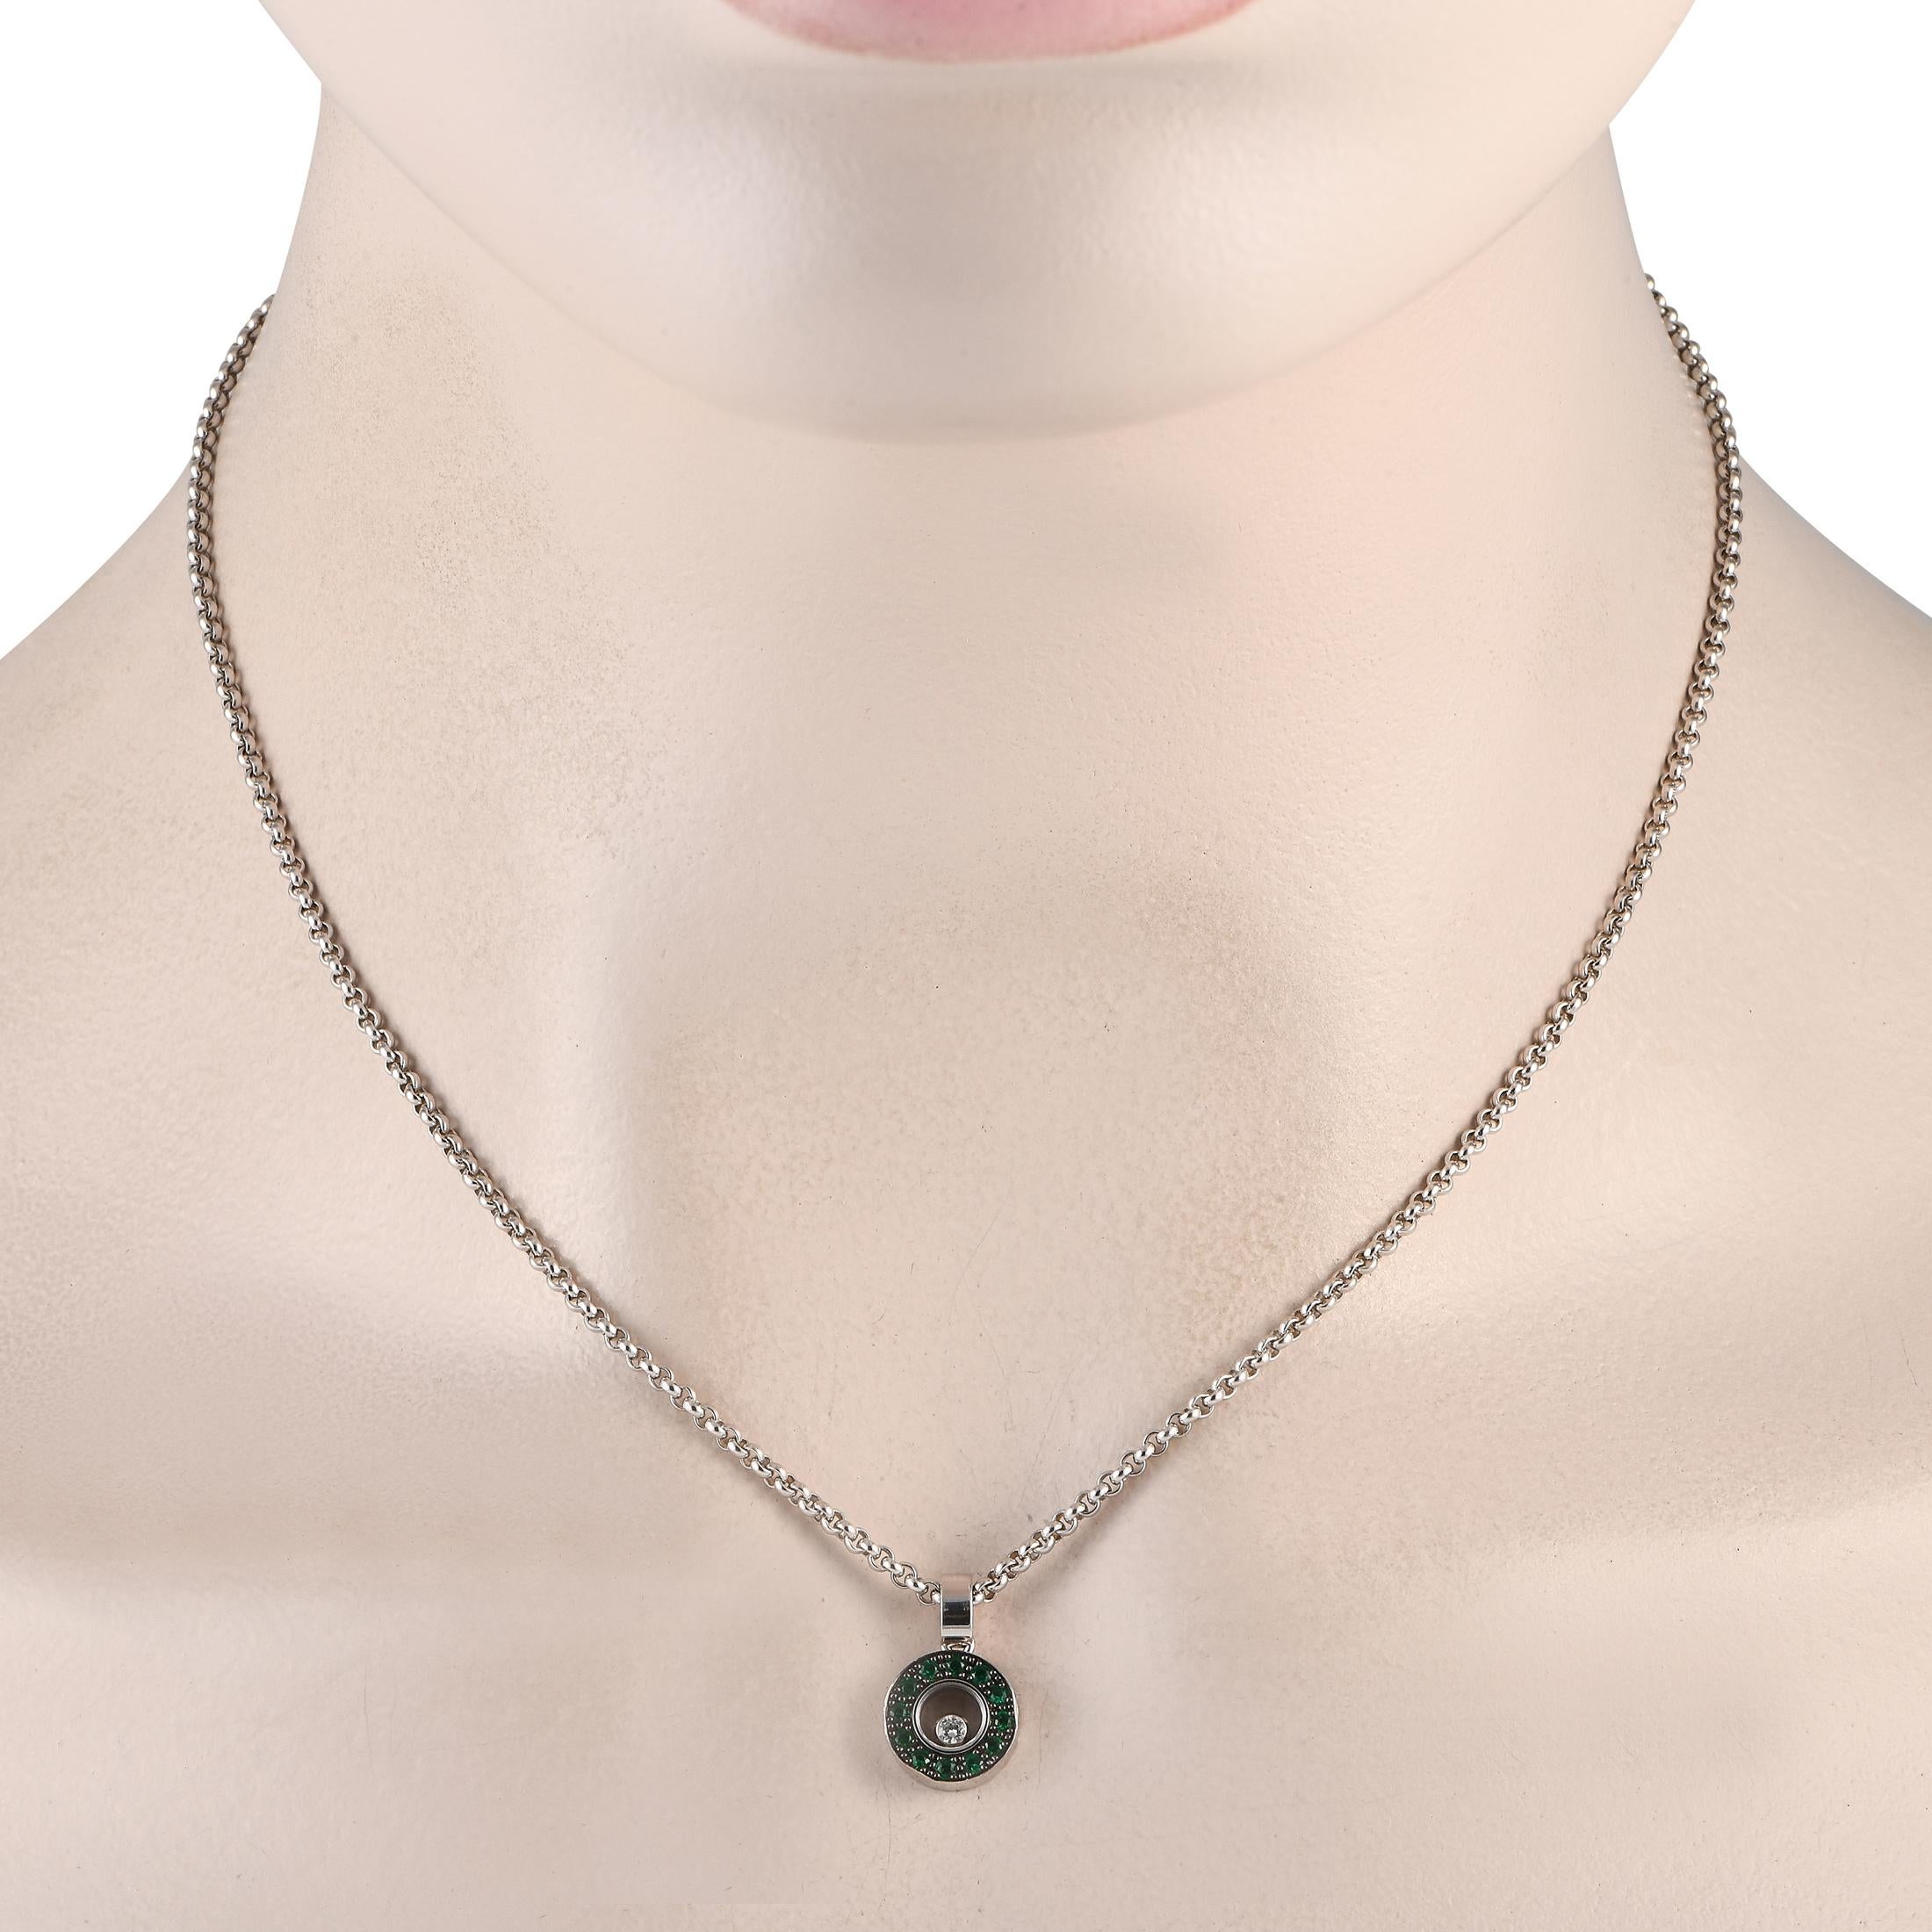 From Chopard's Happy Diamonds collection, here is a daring and playful yet elegant necklace that will bring personality to your style. It features a round pendant with a circular frame of emeralds. At the center are two panes of sapphire crystals,